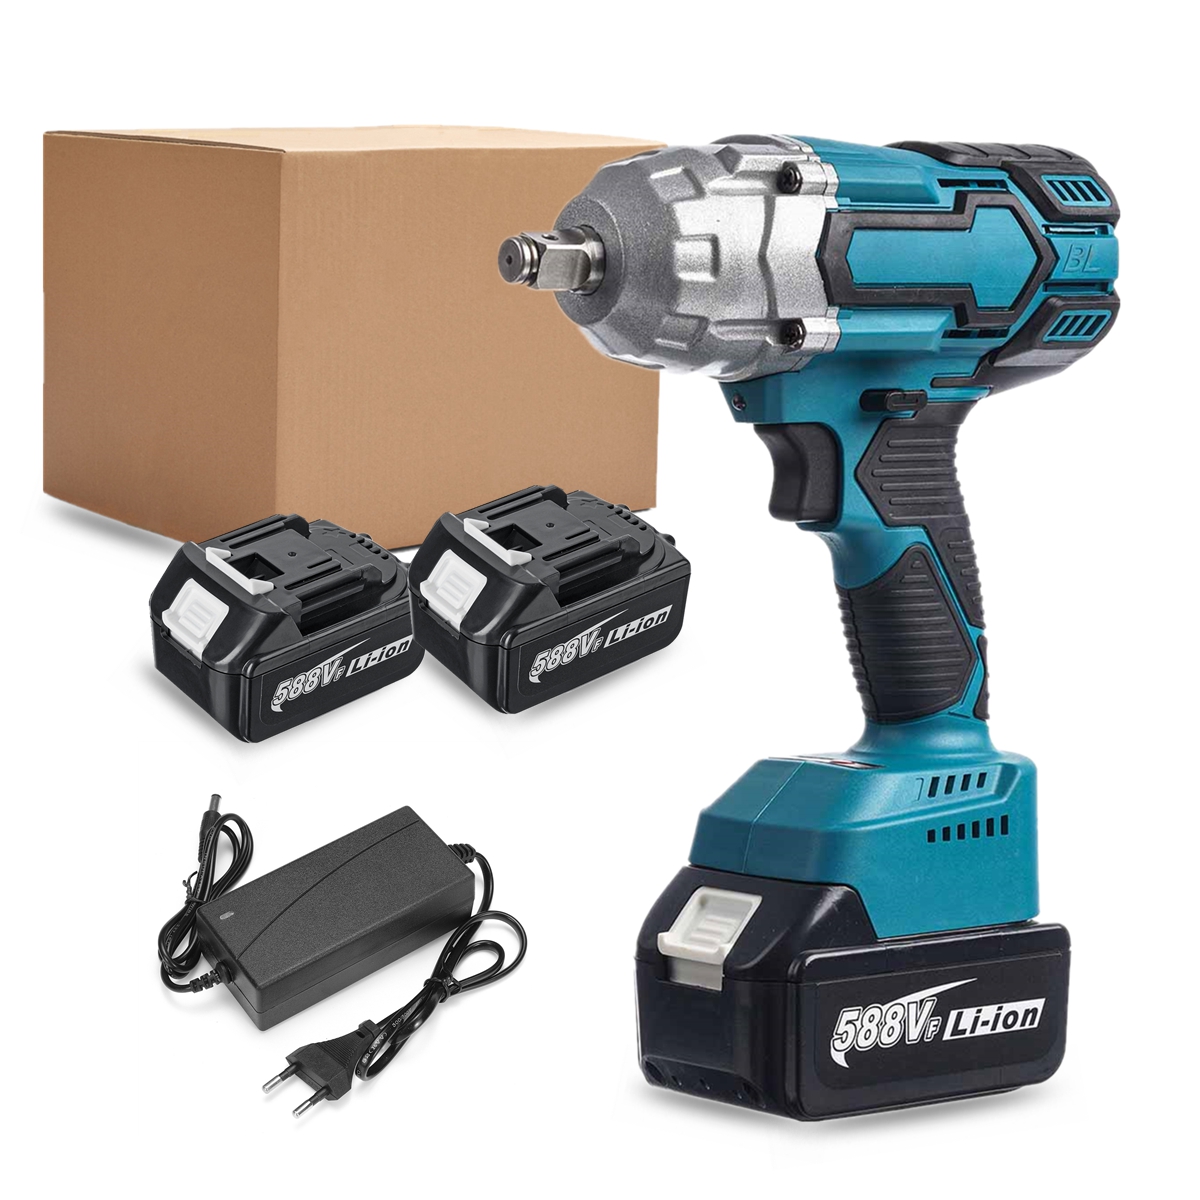 588VF-880Nm-34quot-Cordless-Brushless-Electric-Impact-Wrench-Rechargeable-Woodworking-Maintenance-To-1926542-13